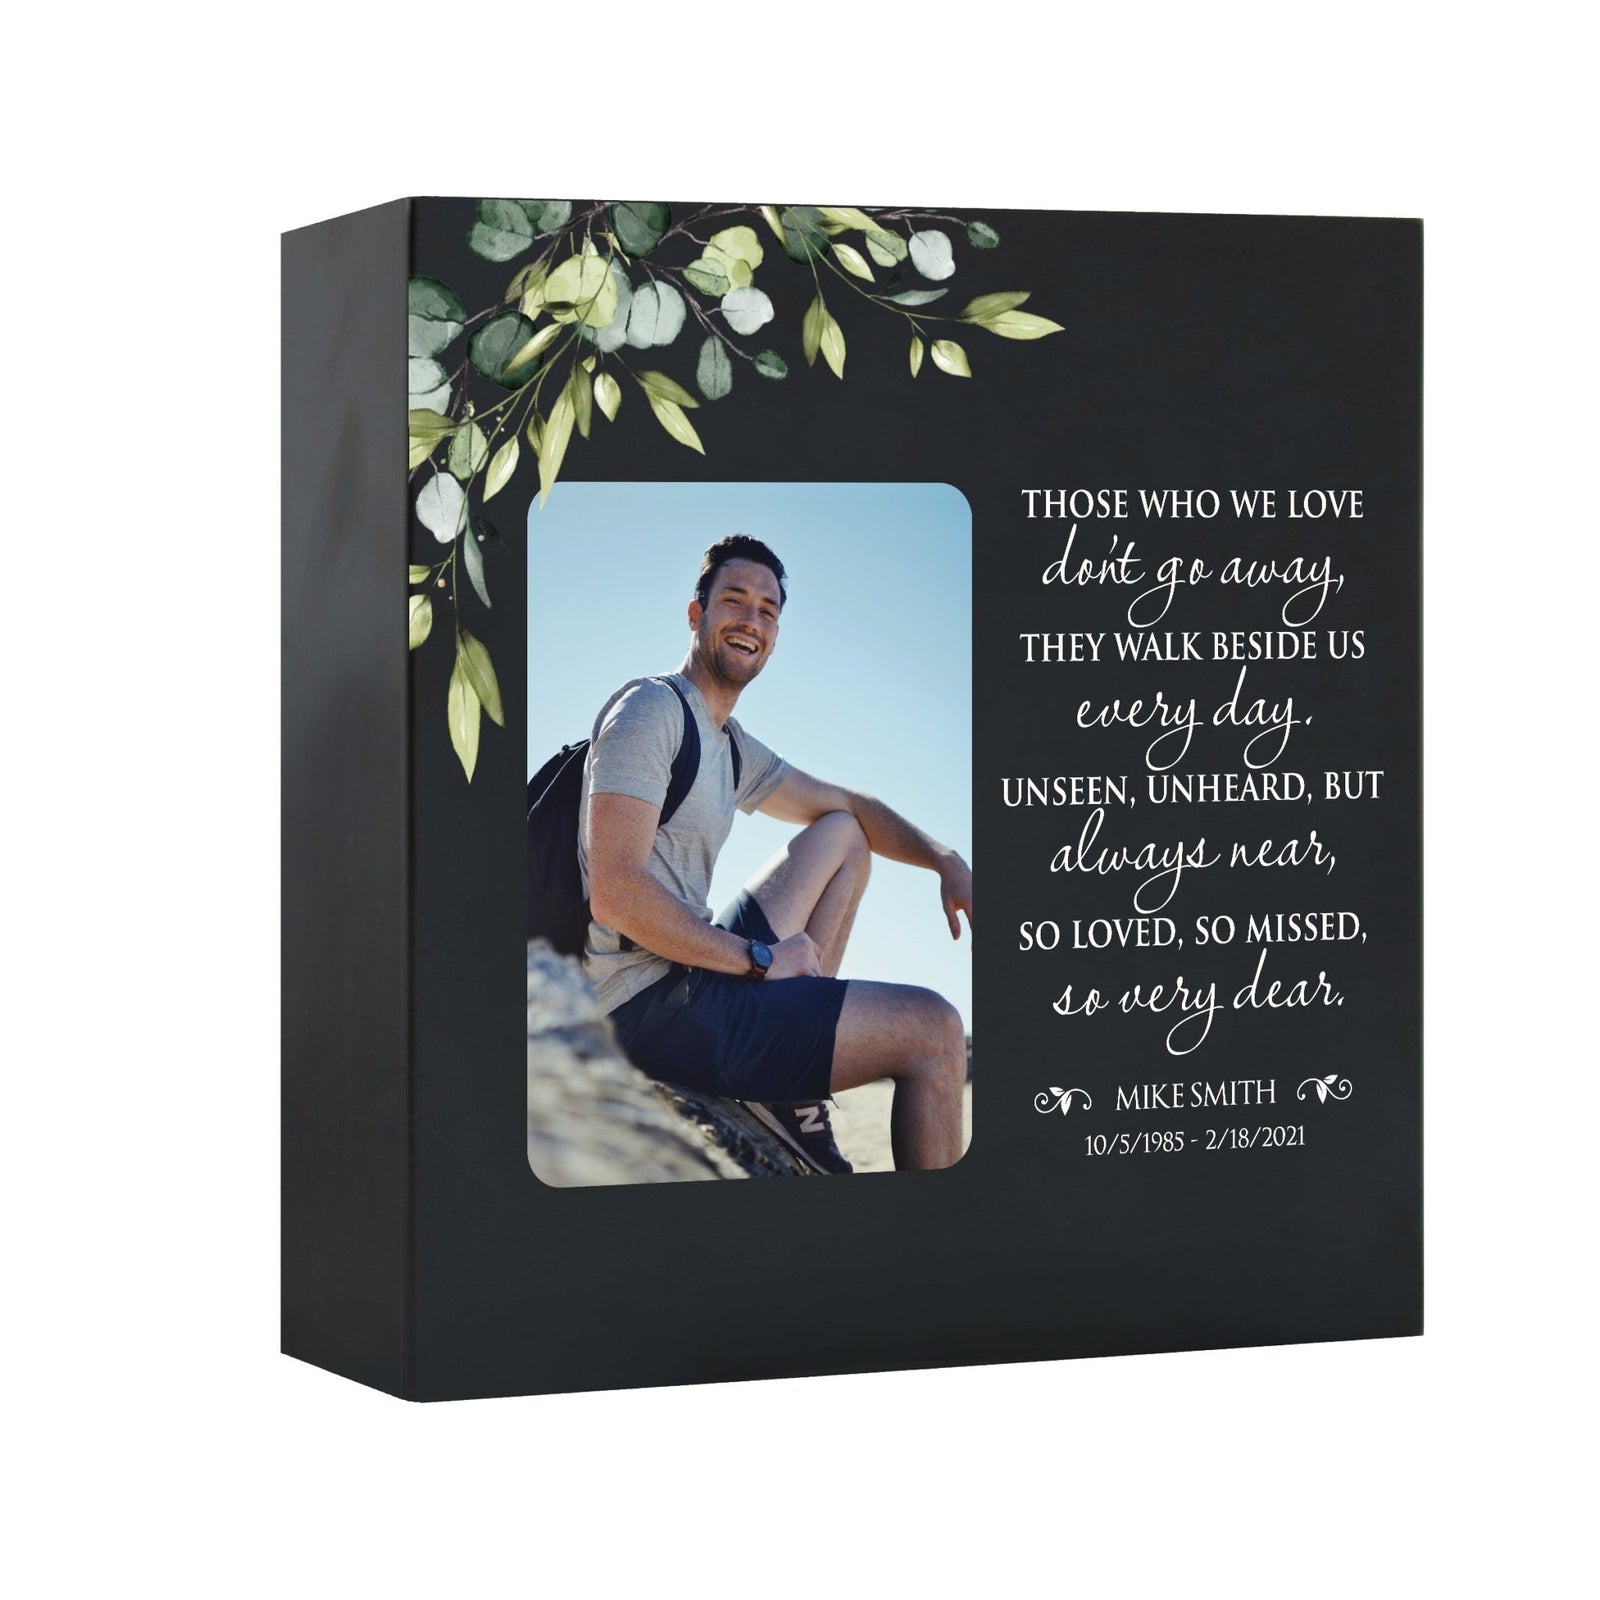 Timeless Human Memorial Shadow Box Photo Urn in Black - Those Who We Love - LifeSong Milestones